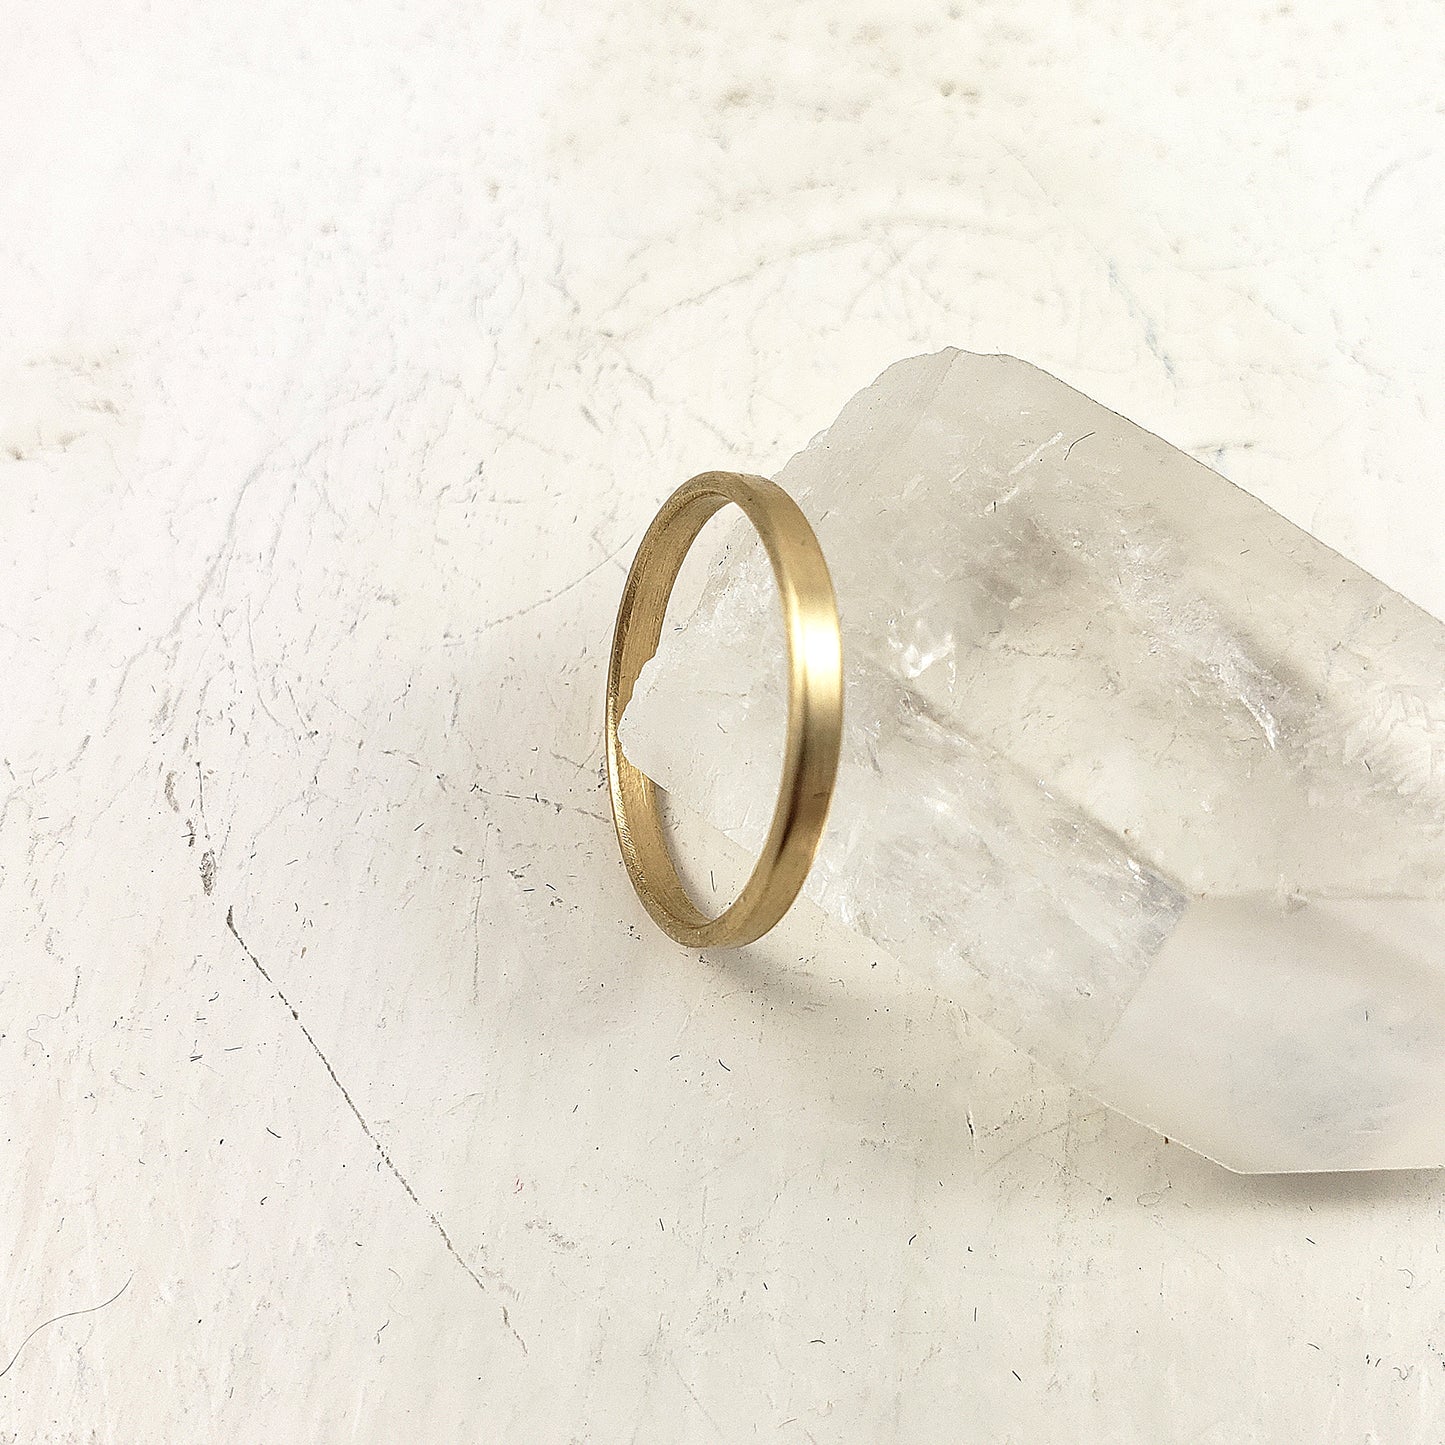 Classic solid gold engagement ring, simple, minimalist, modern